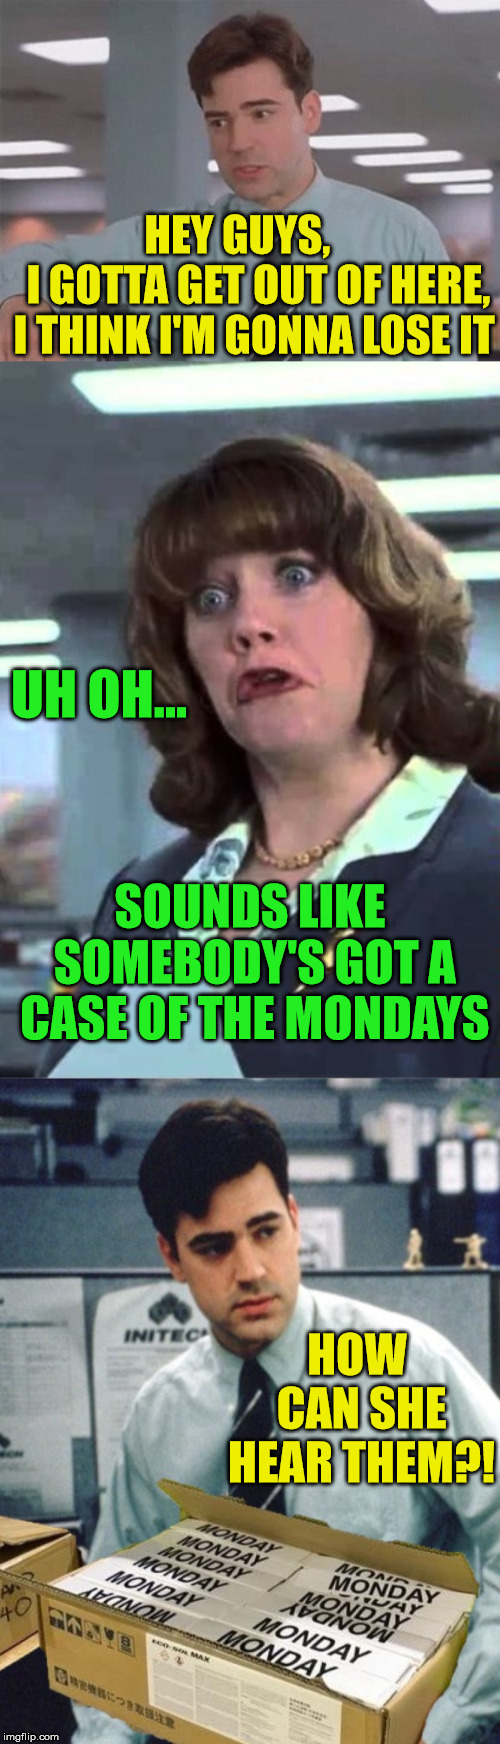 Case of the Monday's | HEY GUYS,         I GOTTA GET OUT OF HERE, I THINK I'M GONNA LOSE IT; UH OH... SOUNDS LIKE SOMEBODY'S GOT A CASE OF THE MONDAYS; HOW CAN SHE HEAR THEM?! | image tagged in office space,monday,memes,uh oh,first world problems,and everybody loses their minds | made w/ Imgflip meme maker